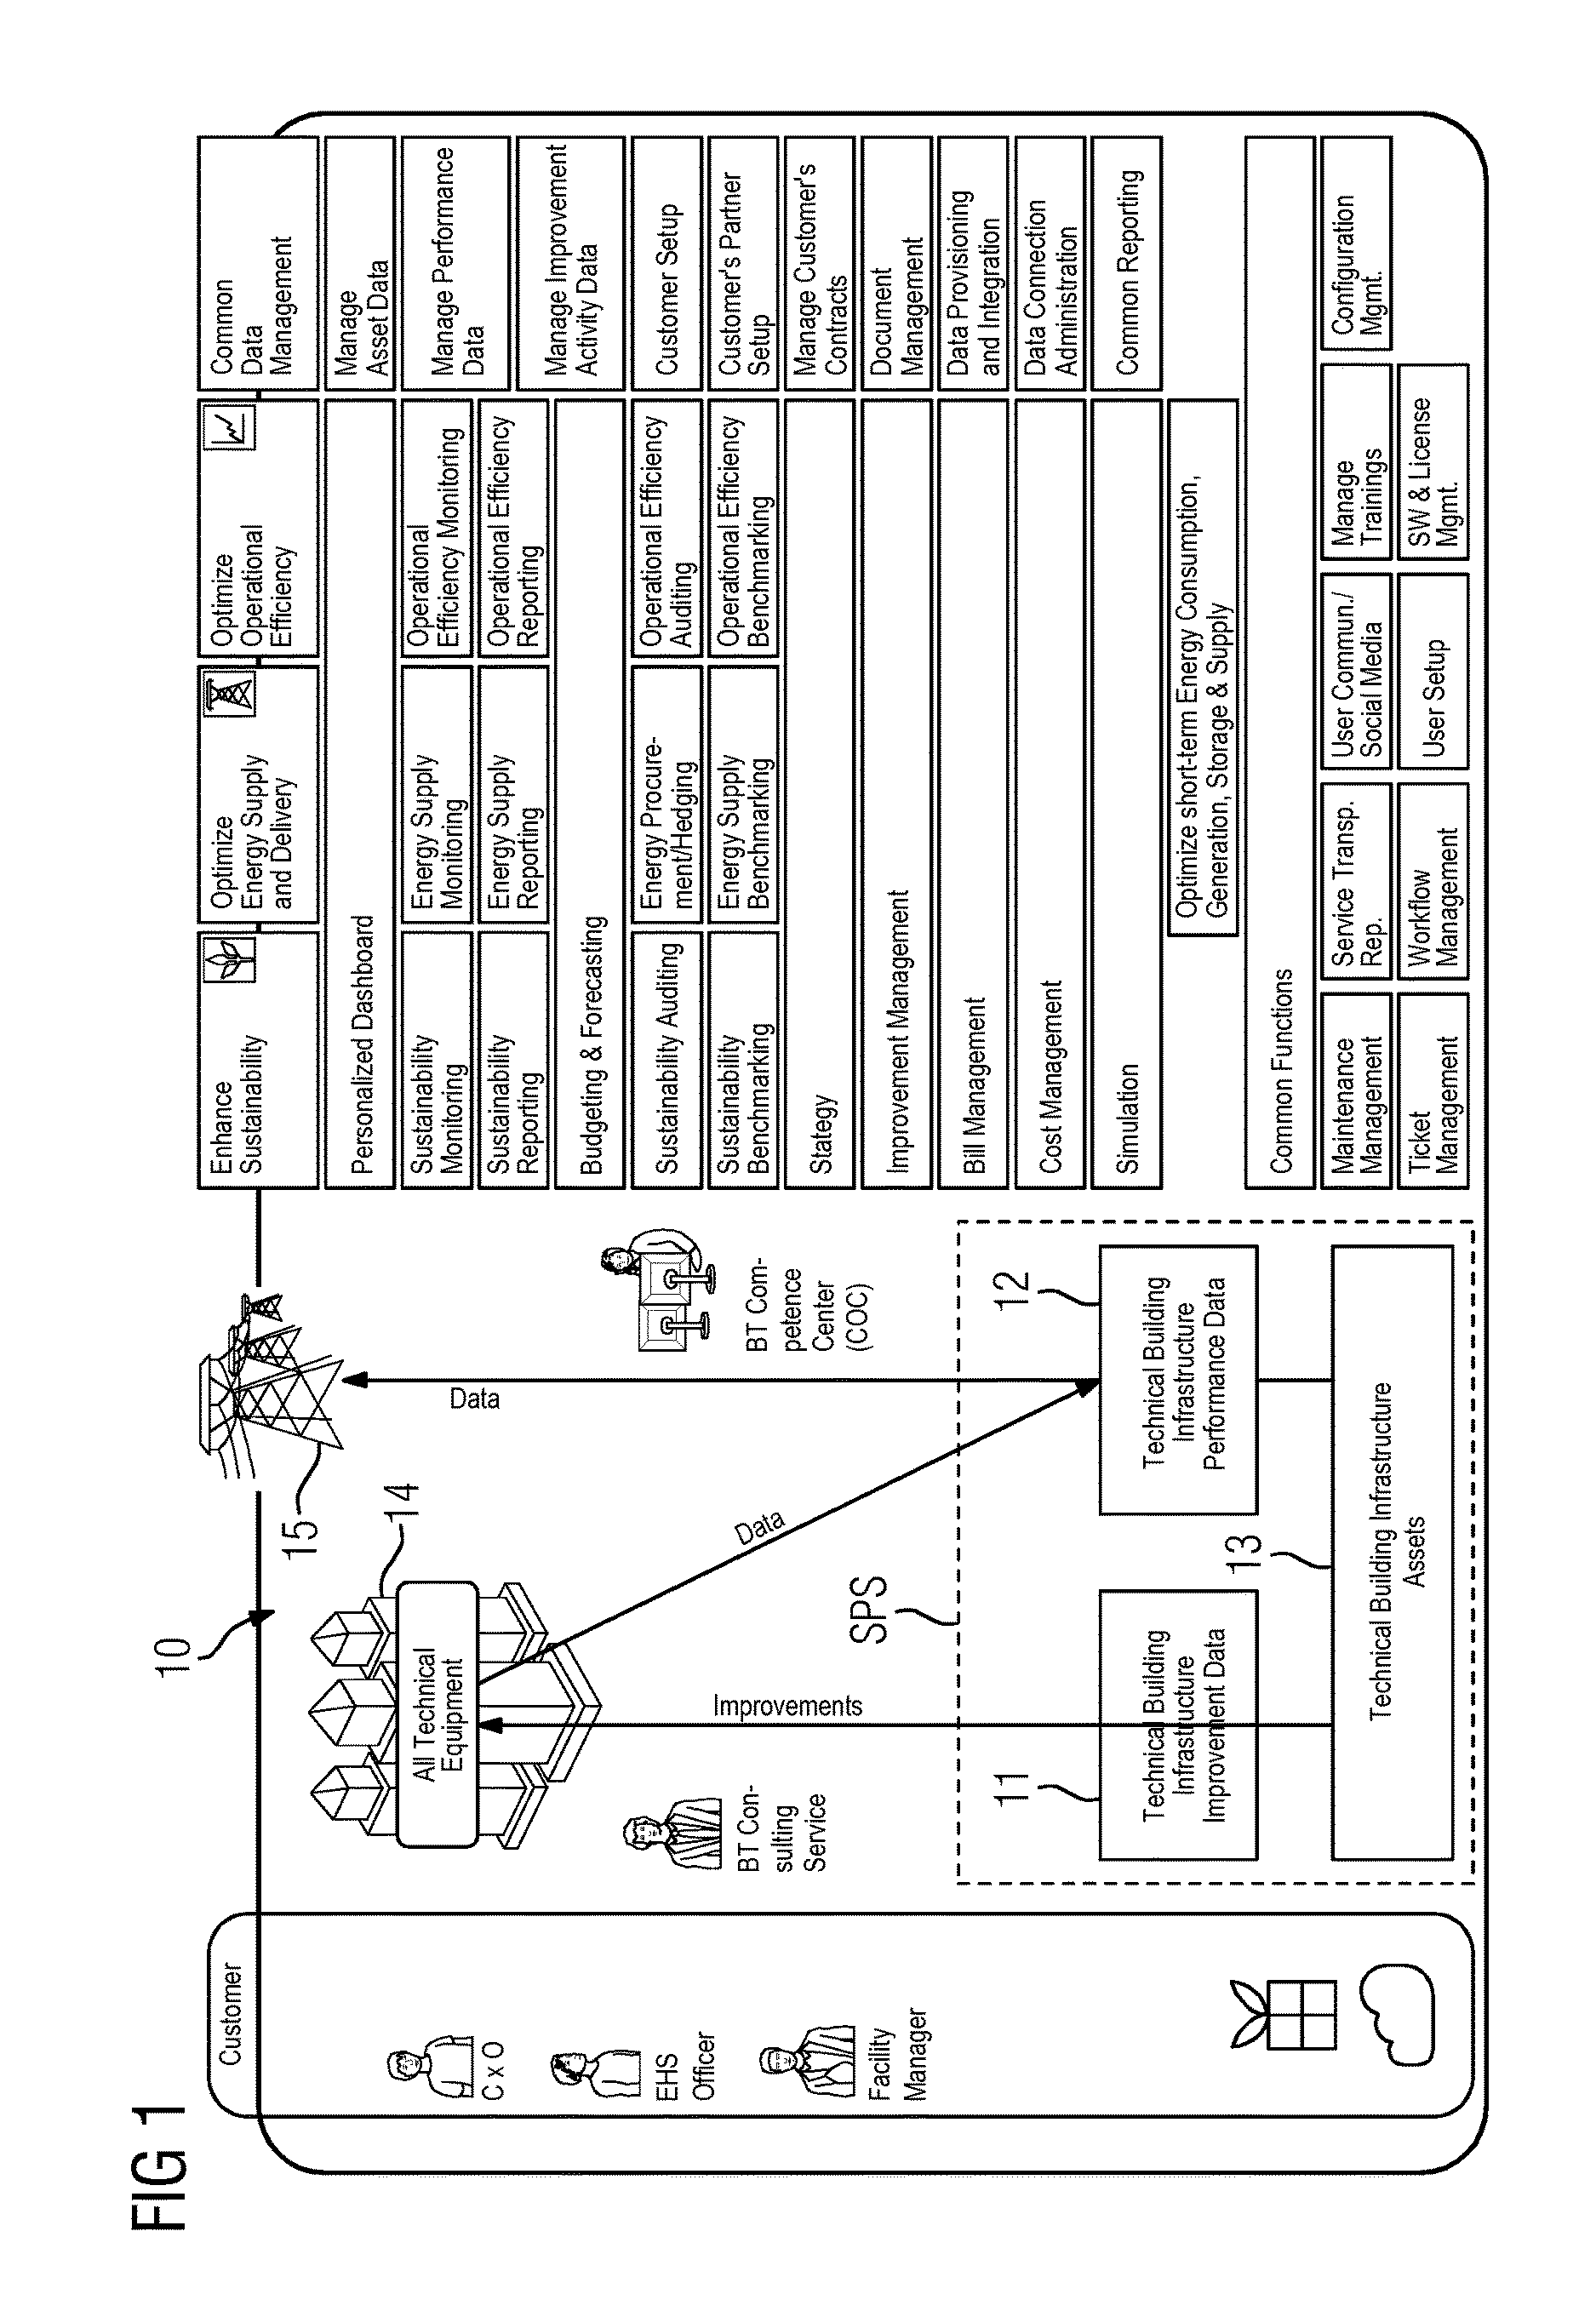 System and method for fault analysis and prioritization